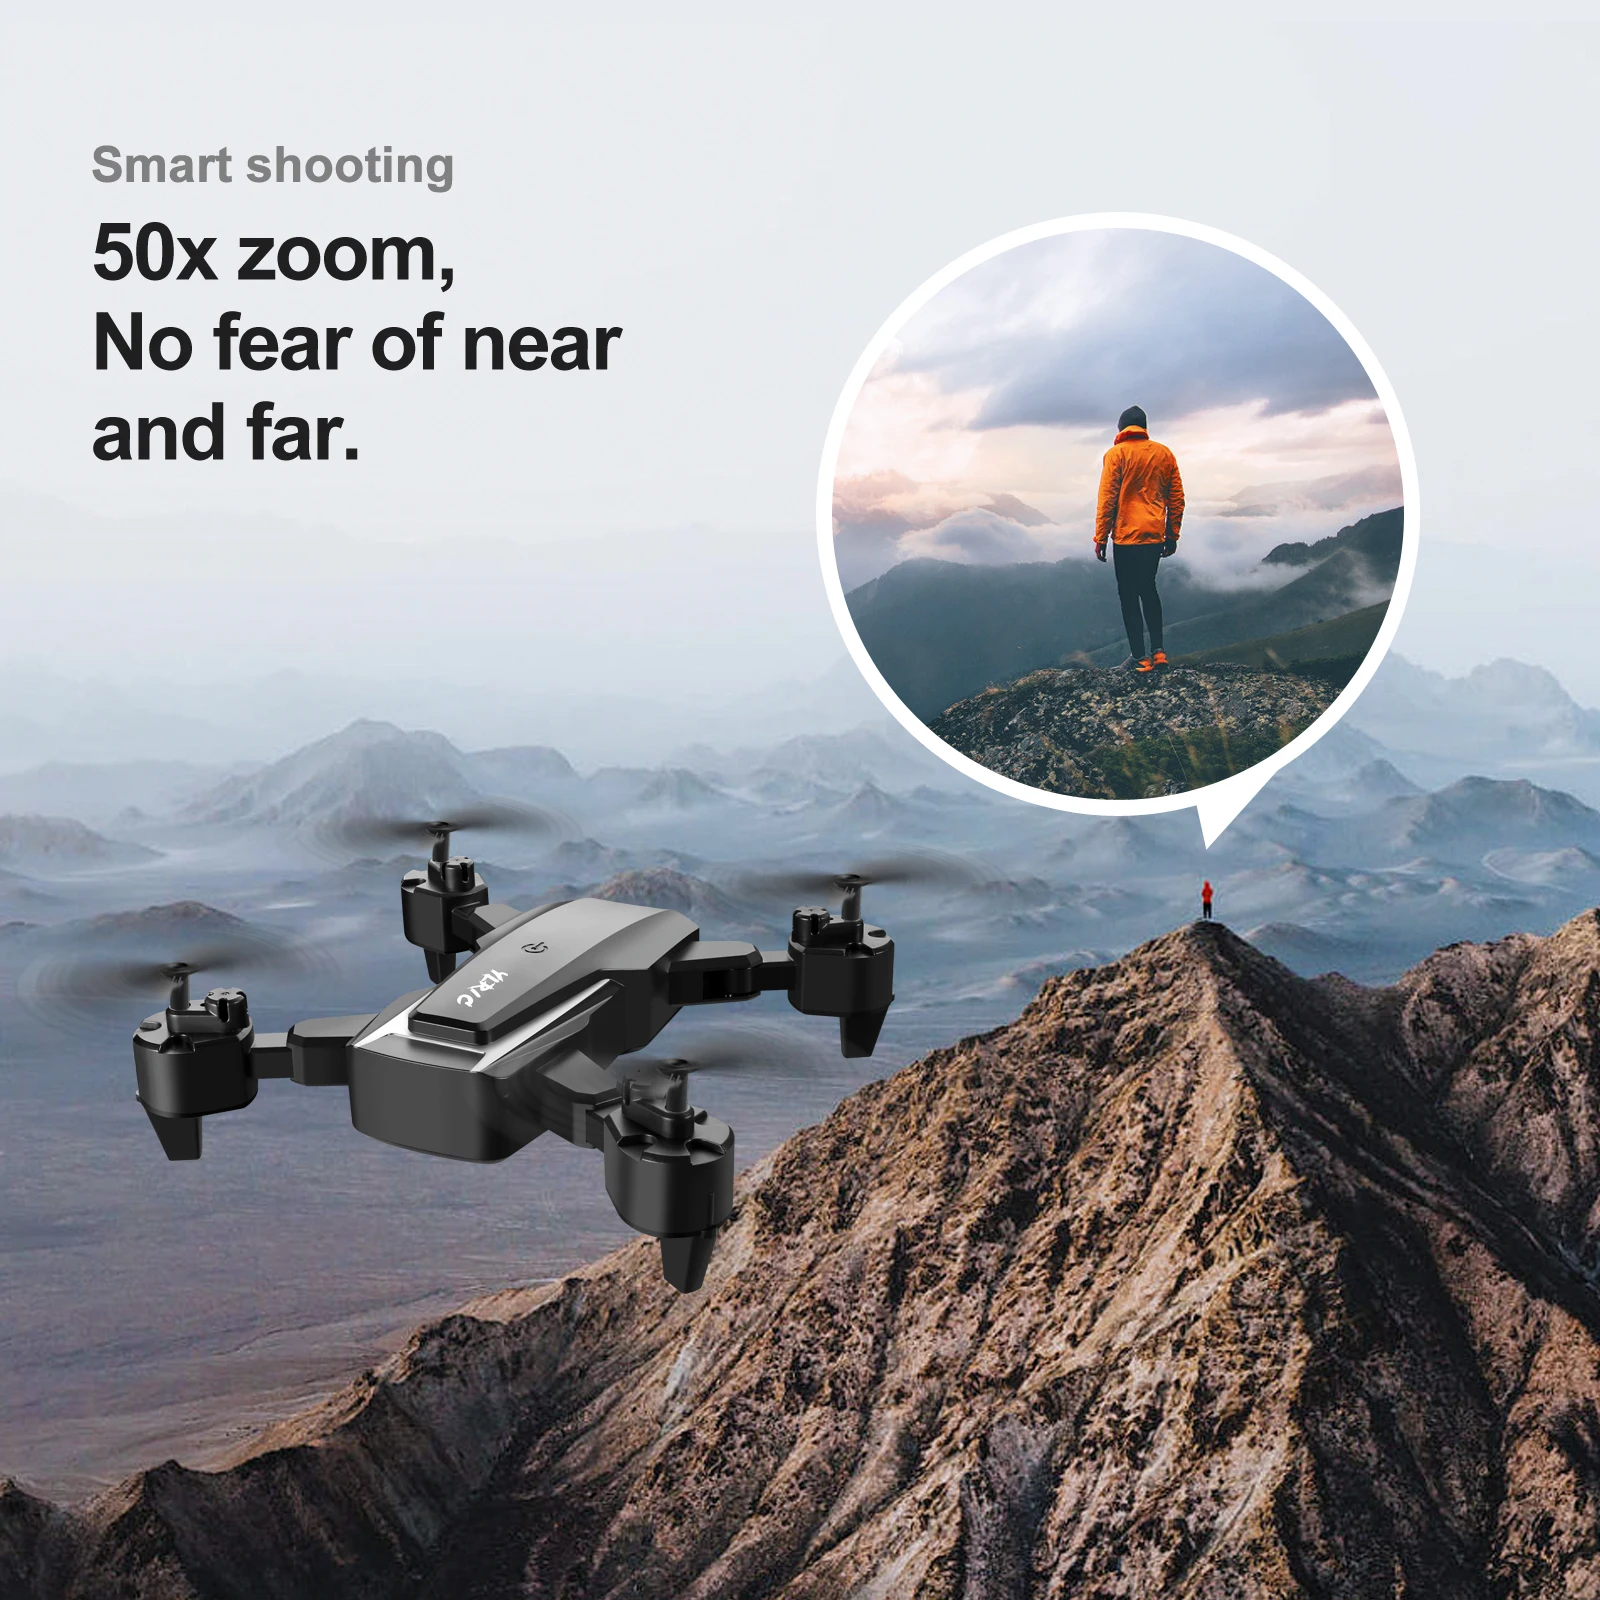 New S90 Drone Quadcopter Remote Control Aircraft 4K Profession HD Wide Angle Camera with ESC Aerial Photography RC Drones Toys enlarge